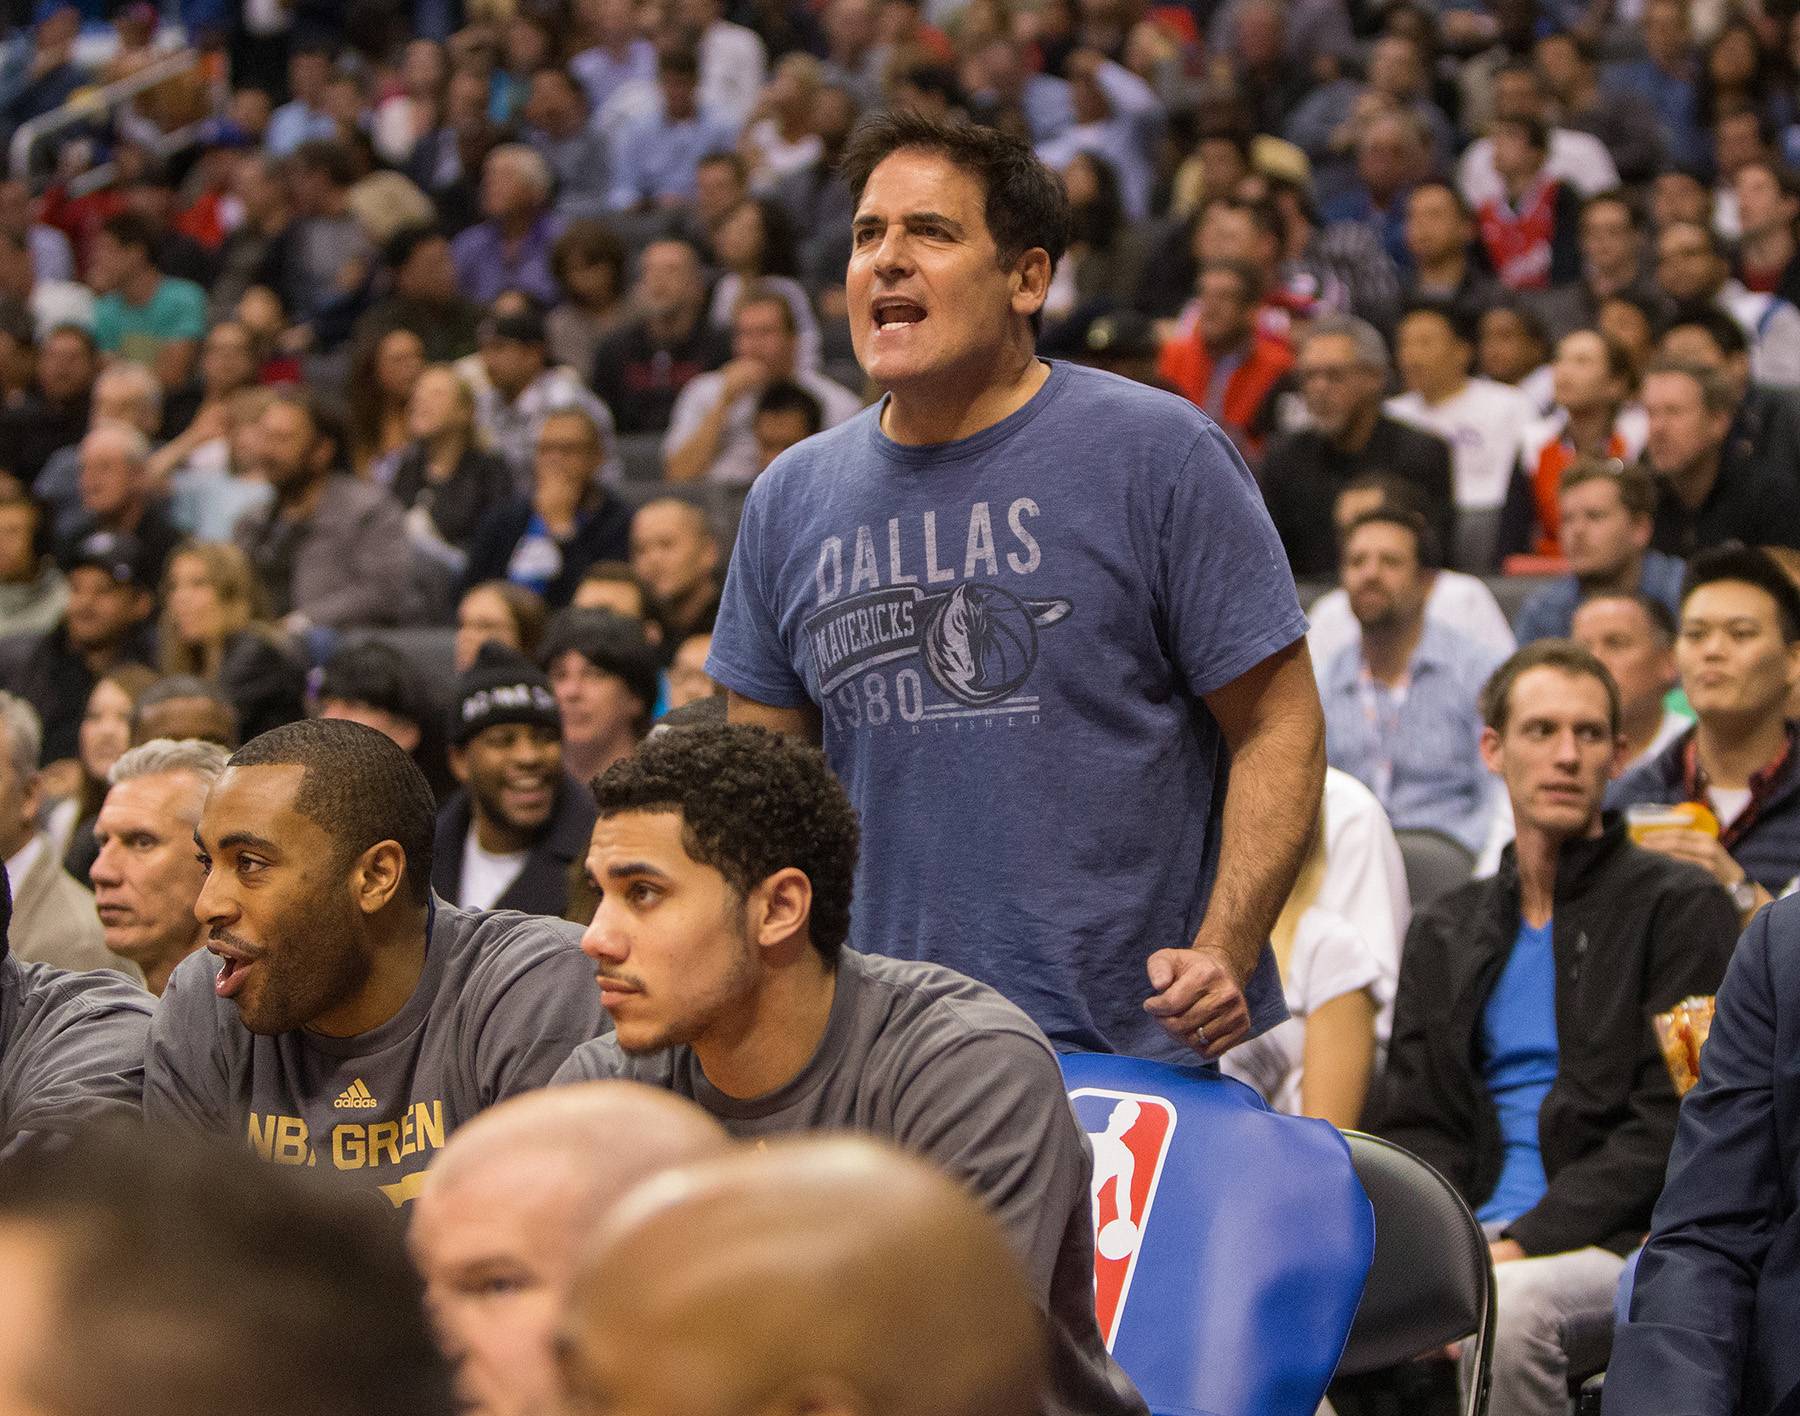 Mark Cuban Says Thunder Should Race to The Bottom This Season - Seeing that the Oklahoma City Thunder (2-5) are struggling early on this season without superstars Kevin Durant and Russell Westbrook, Mark Cuban has an idea for them. The outspoken Dallas Mavericks owner suggested Sunday that the Thunder should strongly consider tanking the rest of its 2014-15 season in pursuit of landing a franchise-changing player in the NBA Draft. Cuban cited the San Antonio Spurs’ 20-62 finish in 1996-97 enabling them to land Tim Duncan in the 1997 NBA Draft and subsequently collect five league titles. &quot;We already specialize in a race to the bottom,&quot; Cuban told ESPN. &quot;More participants won't change anything. They're all high-profile participants.&quot; We highly suspect Cuban is simply trying to put something in the Thunder’s ears in hopes of improving his own Mavs’ chances this season. BET.com decided to examine the billionaire’s rationale and when we did, we determined there are seven reasons why the franchise shouldn’t tank. Why race to the bottom when you still have a chance to be on top?&nbsp;(Photo: Mpu Dinani/Getty Images)